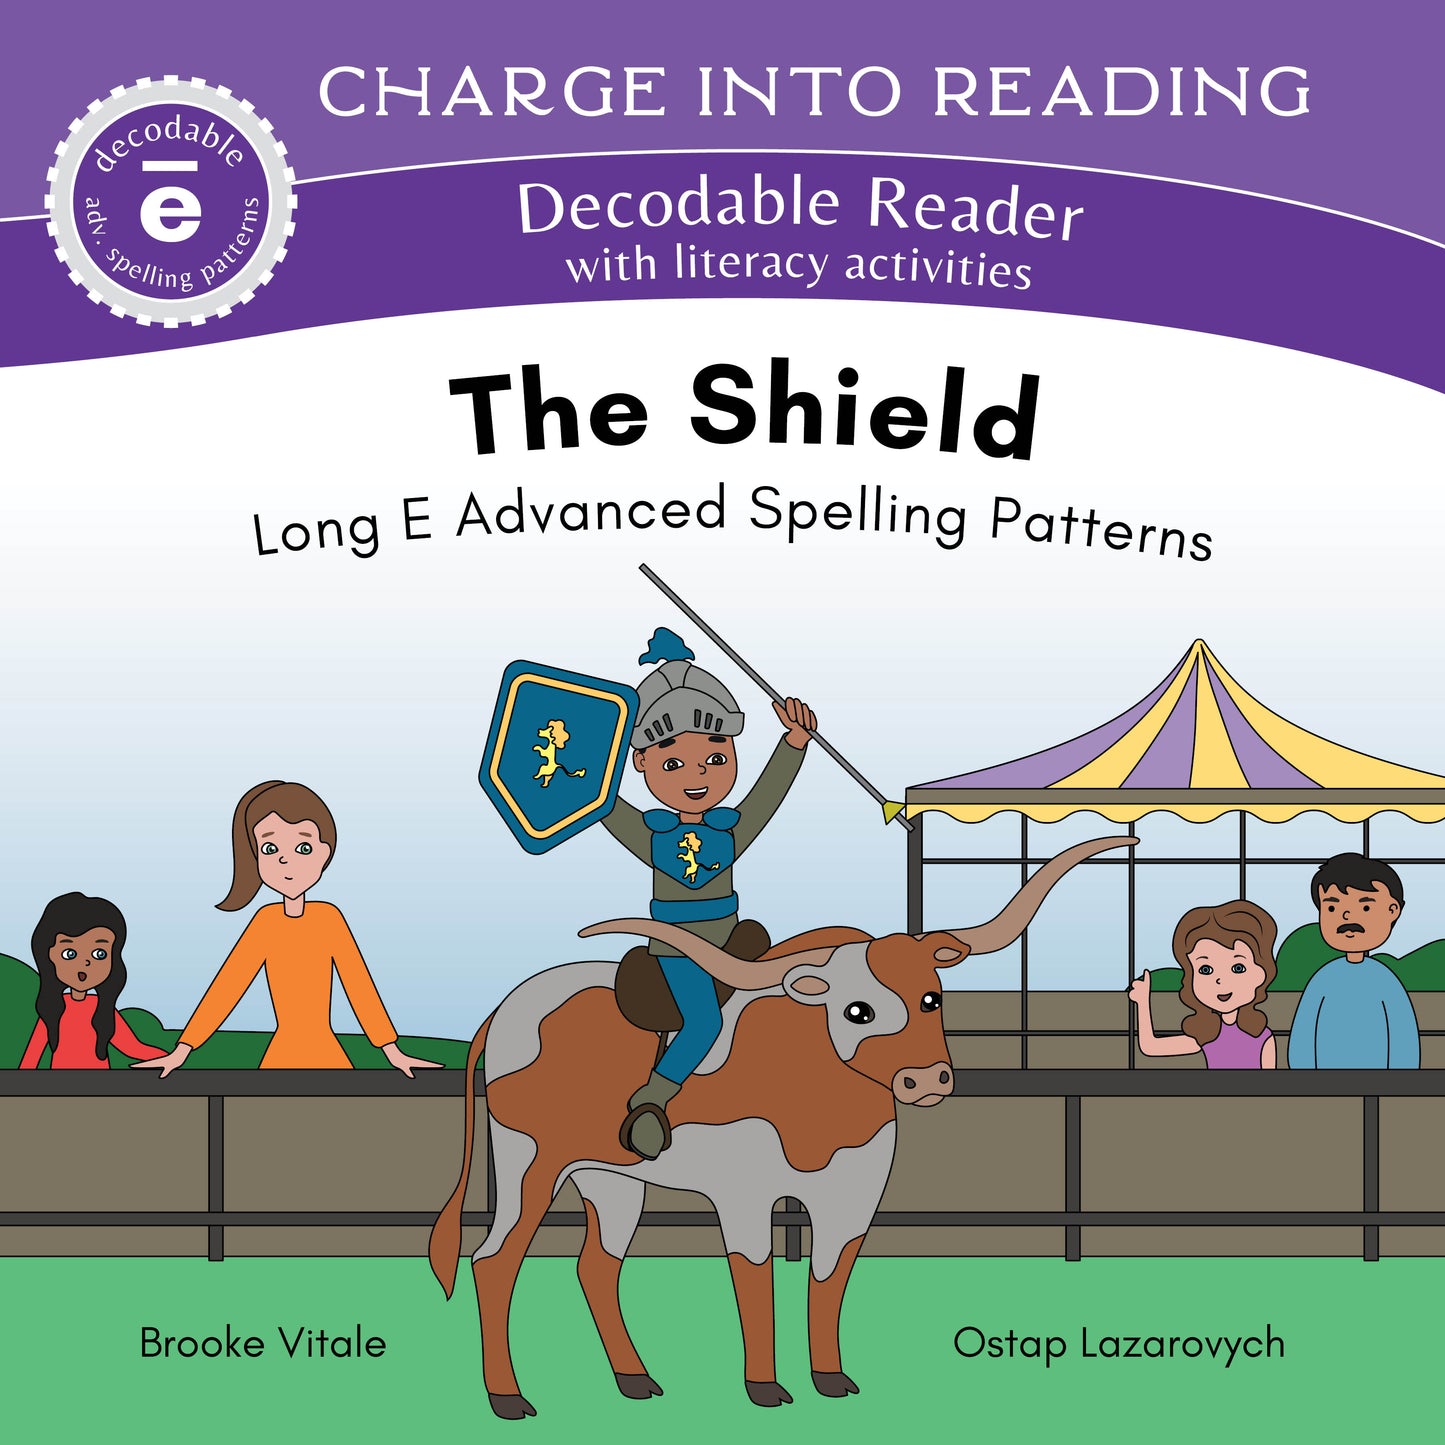 Stage 9: Advanced Spelling Patterns Decodable Reader Set